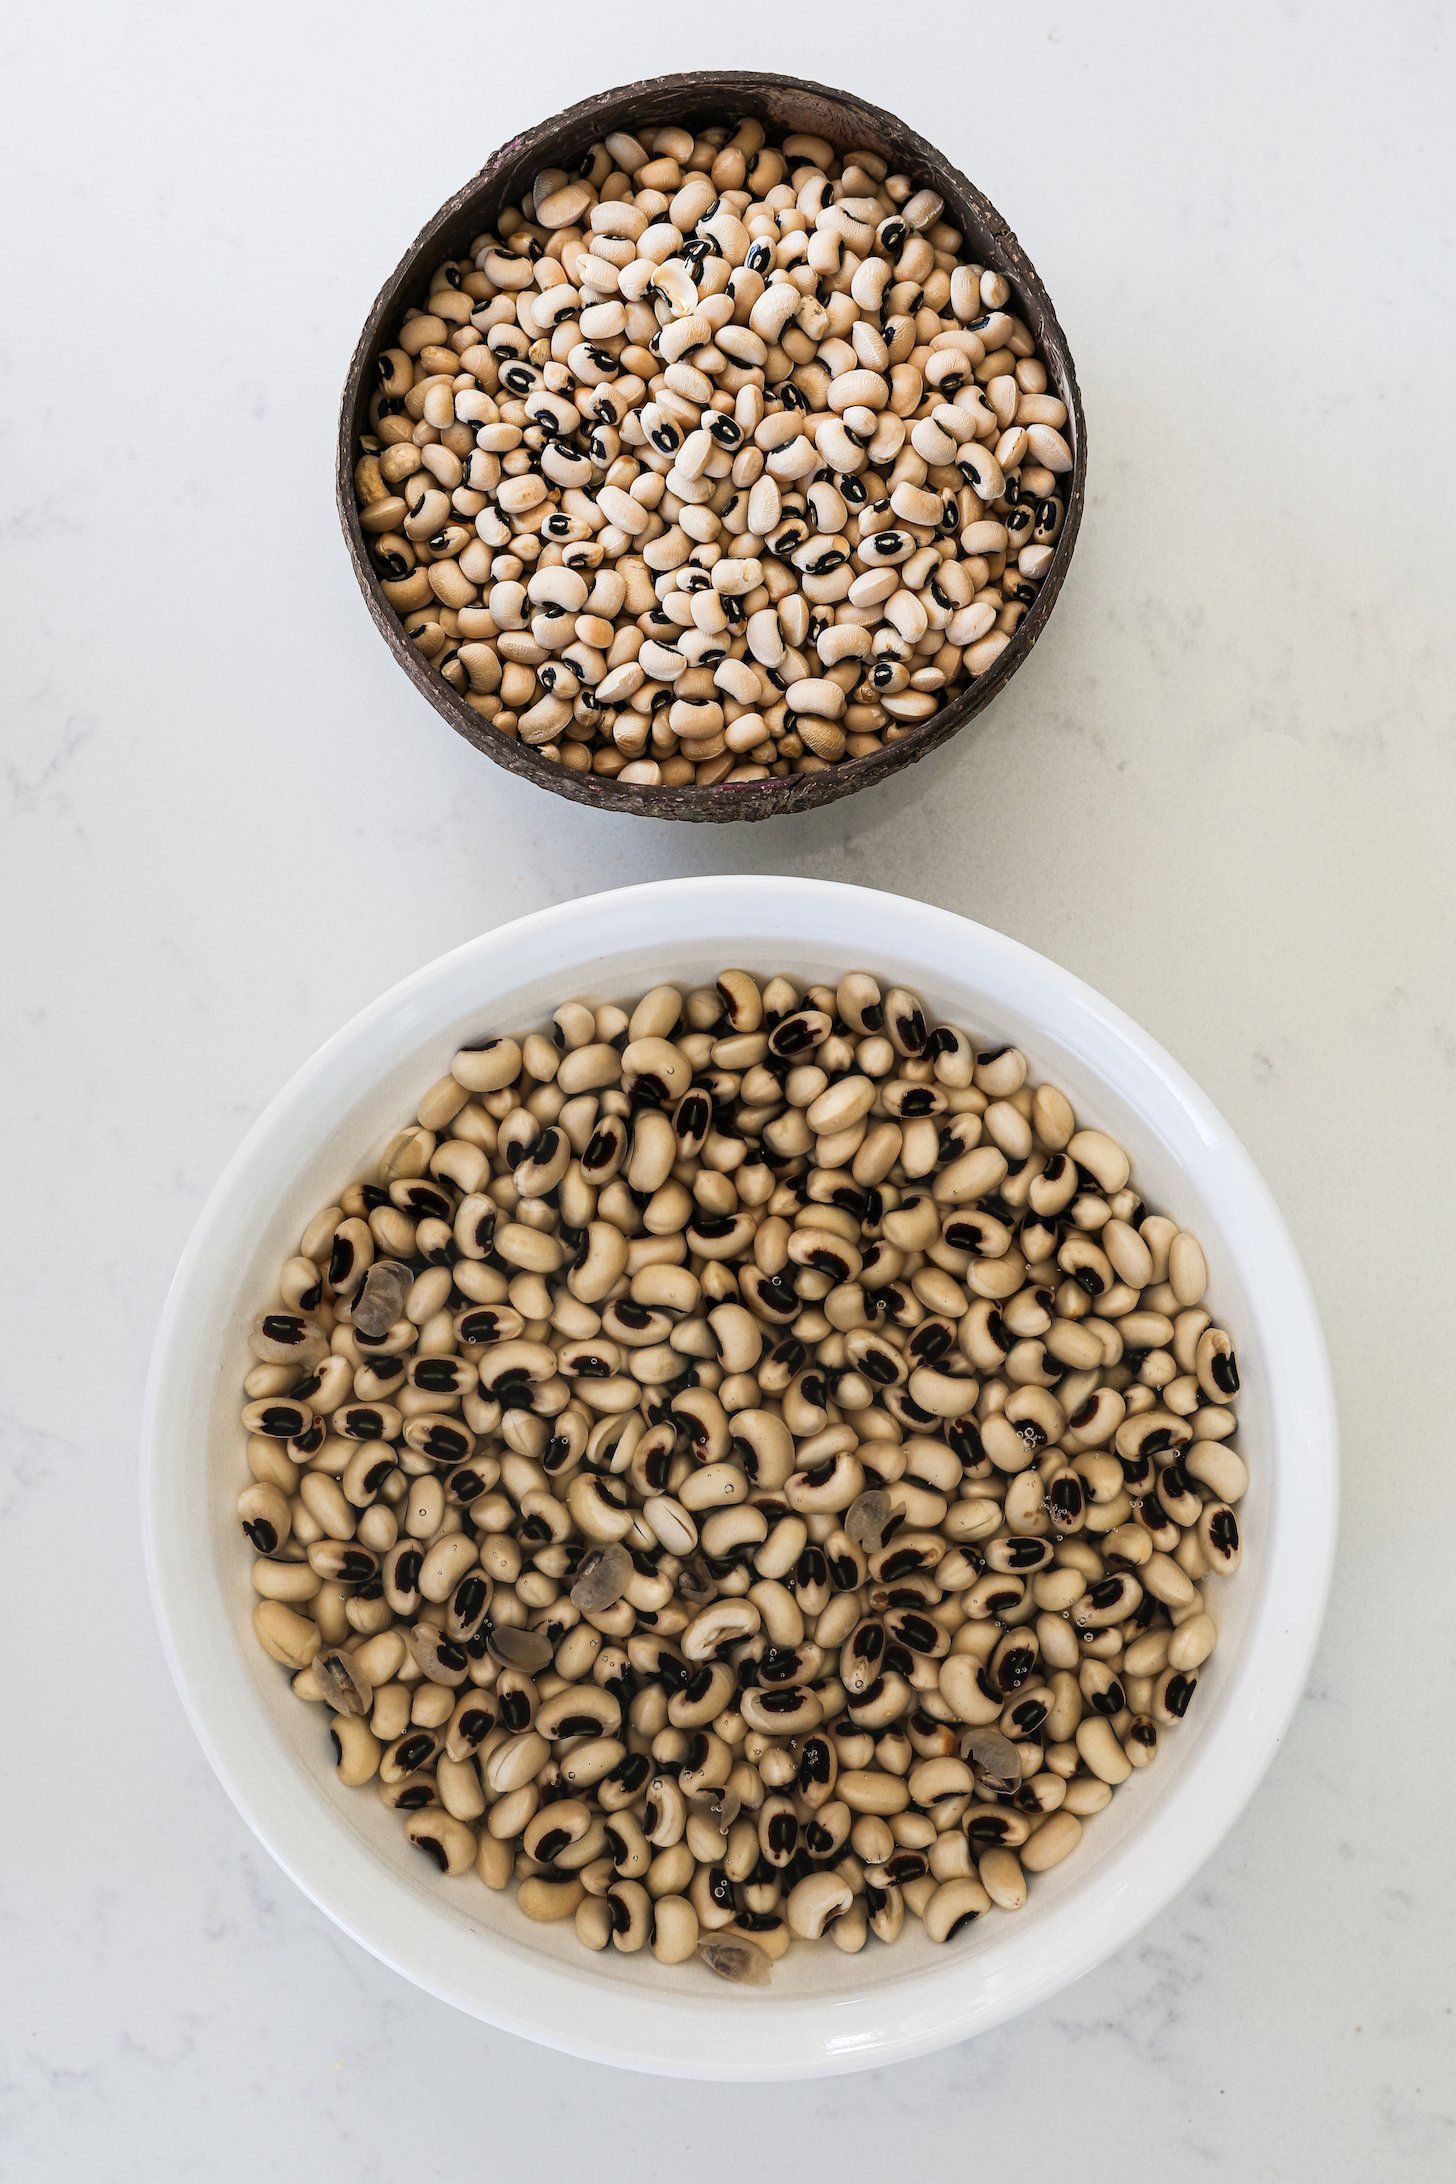 Two bowls: one containing dry black-eyed peas, and the other with black-eyed peas submerged in water.